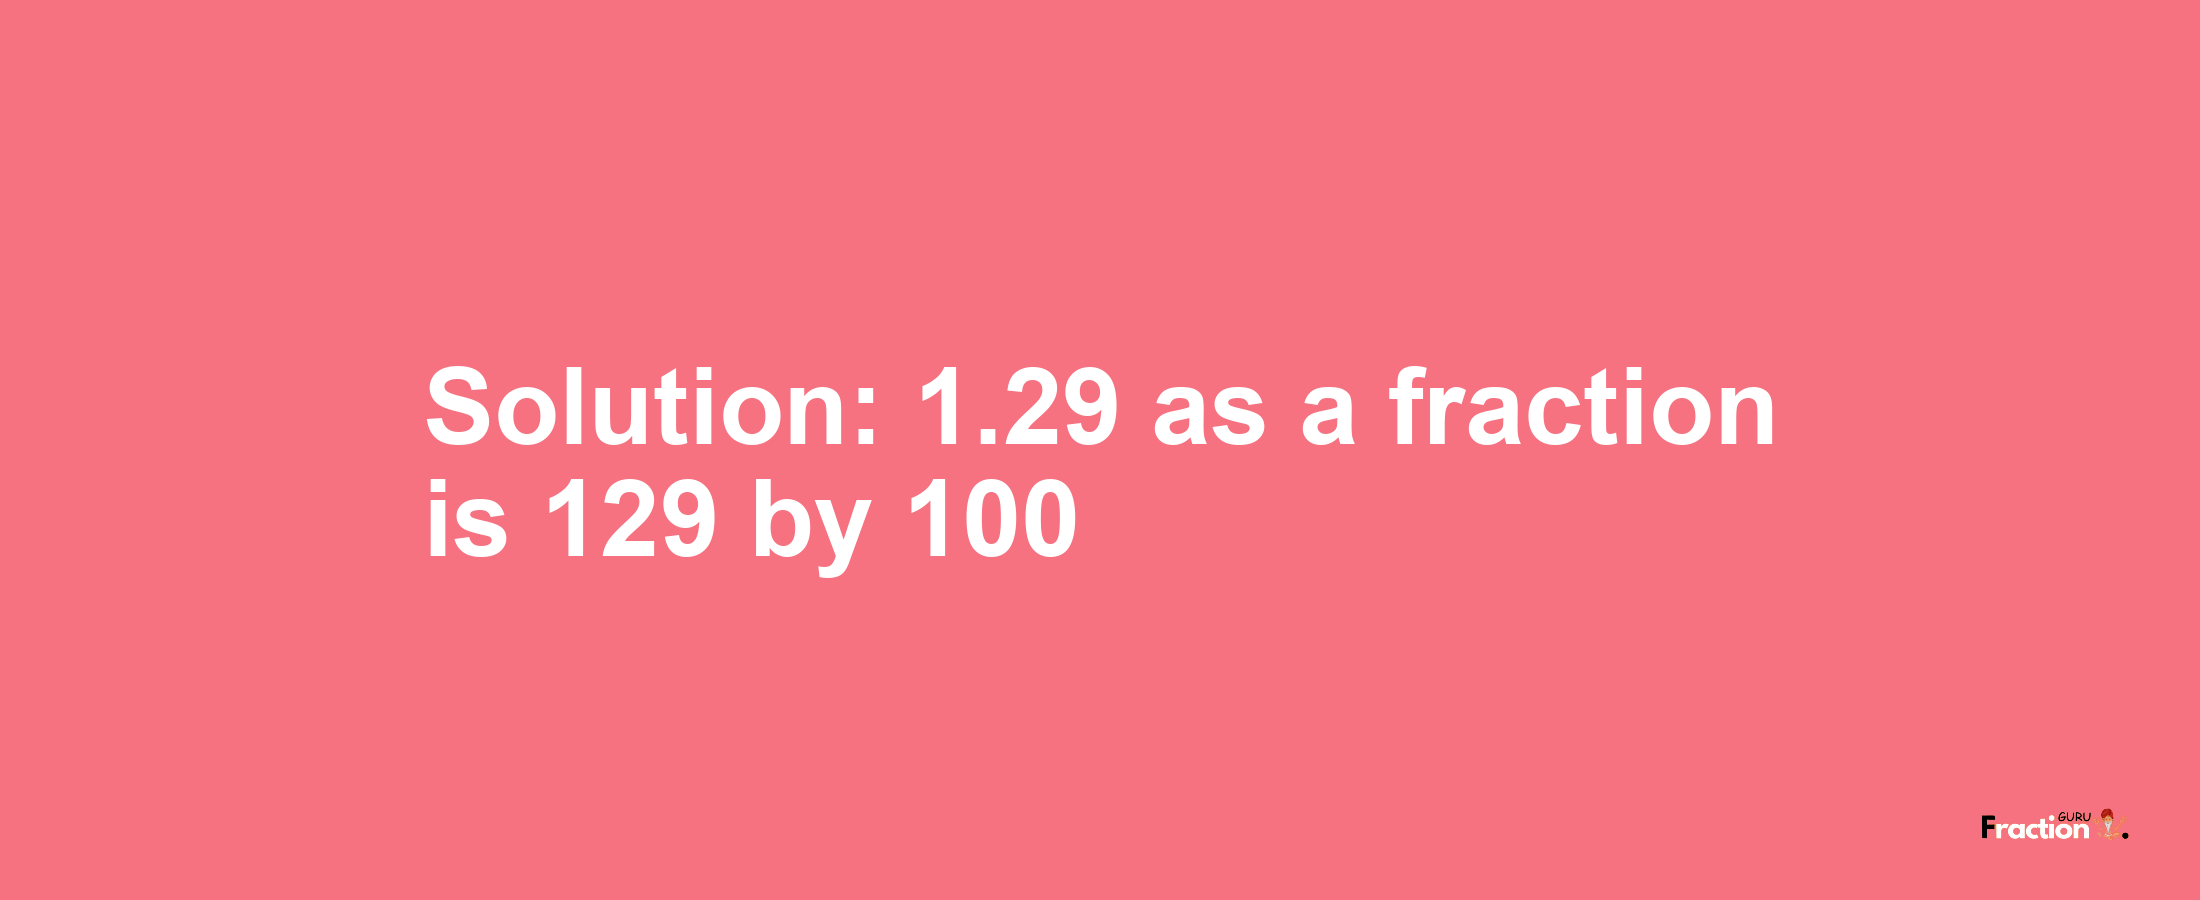 Solution:1.29 as a fraction is 129/100